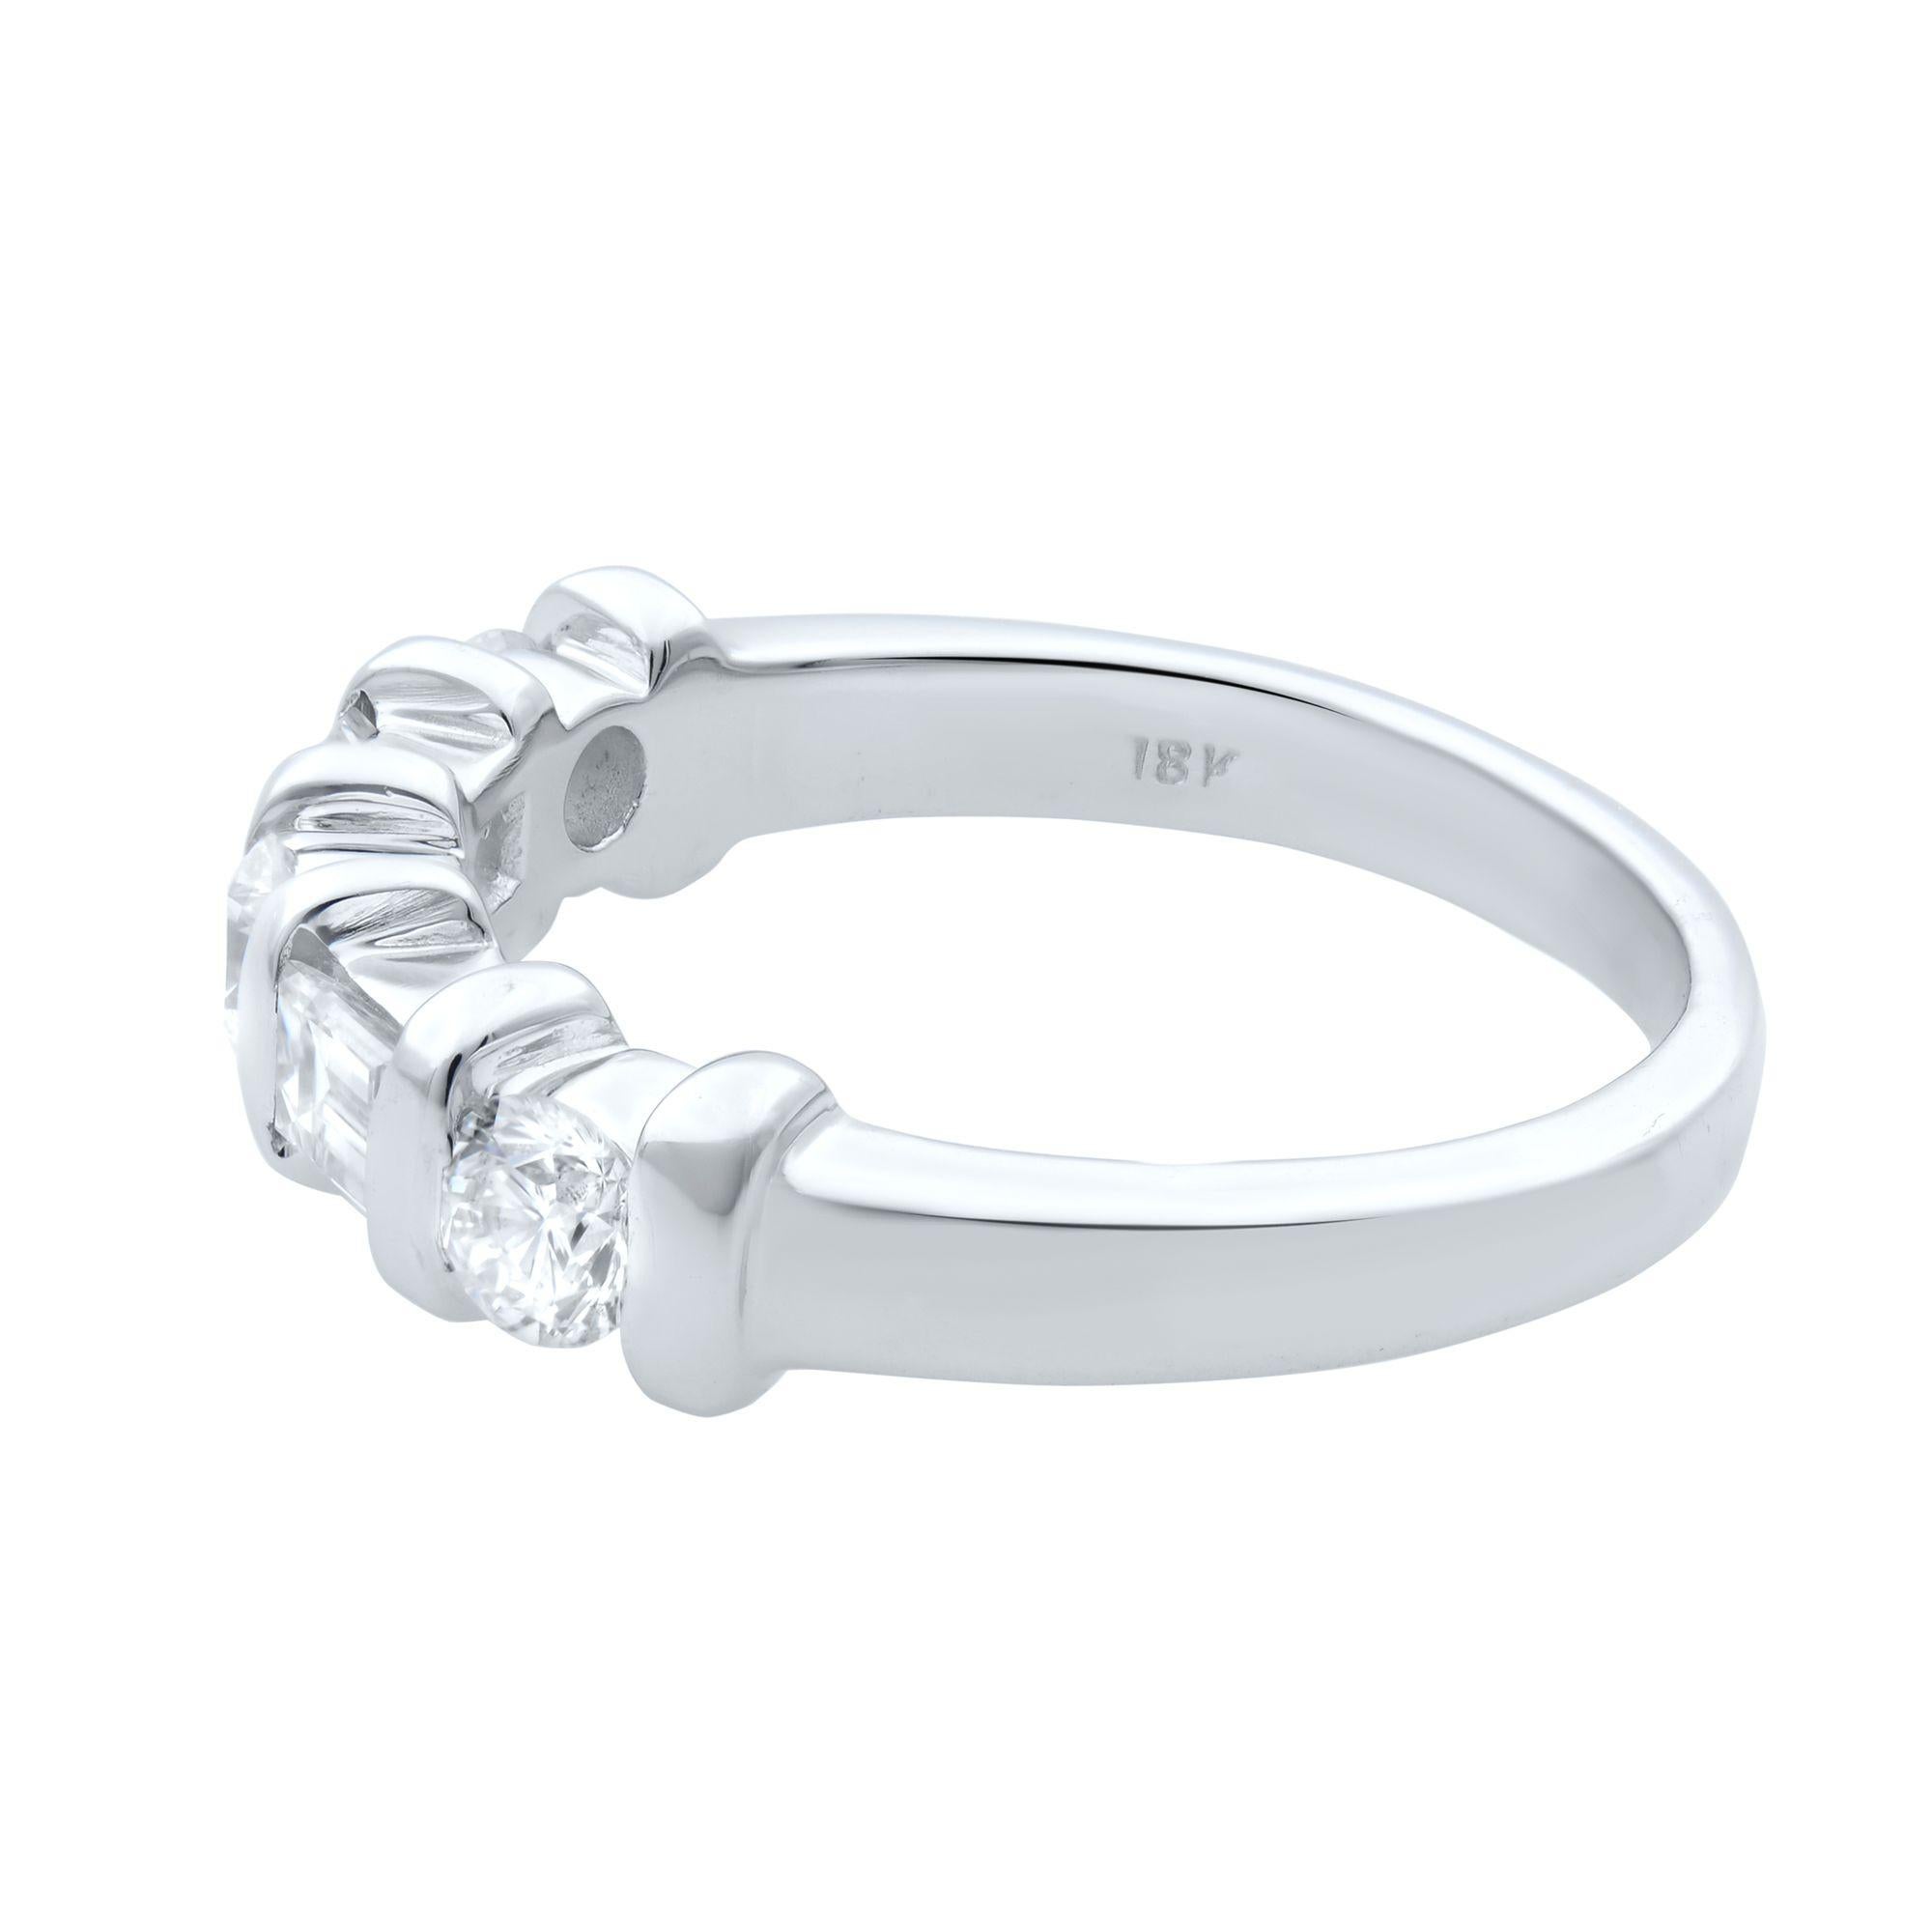 Beautifully crafted 18K white gold wedding band ring with round and emerald cut diamonds. Total diamond carat weight is 0.50. Diamonds are VS1 clarity and G color. Width: 4.85 mm. Ring size 5.75. Comes with a presentable gift box. 